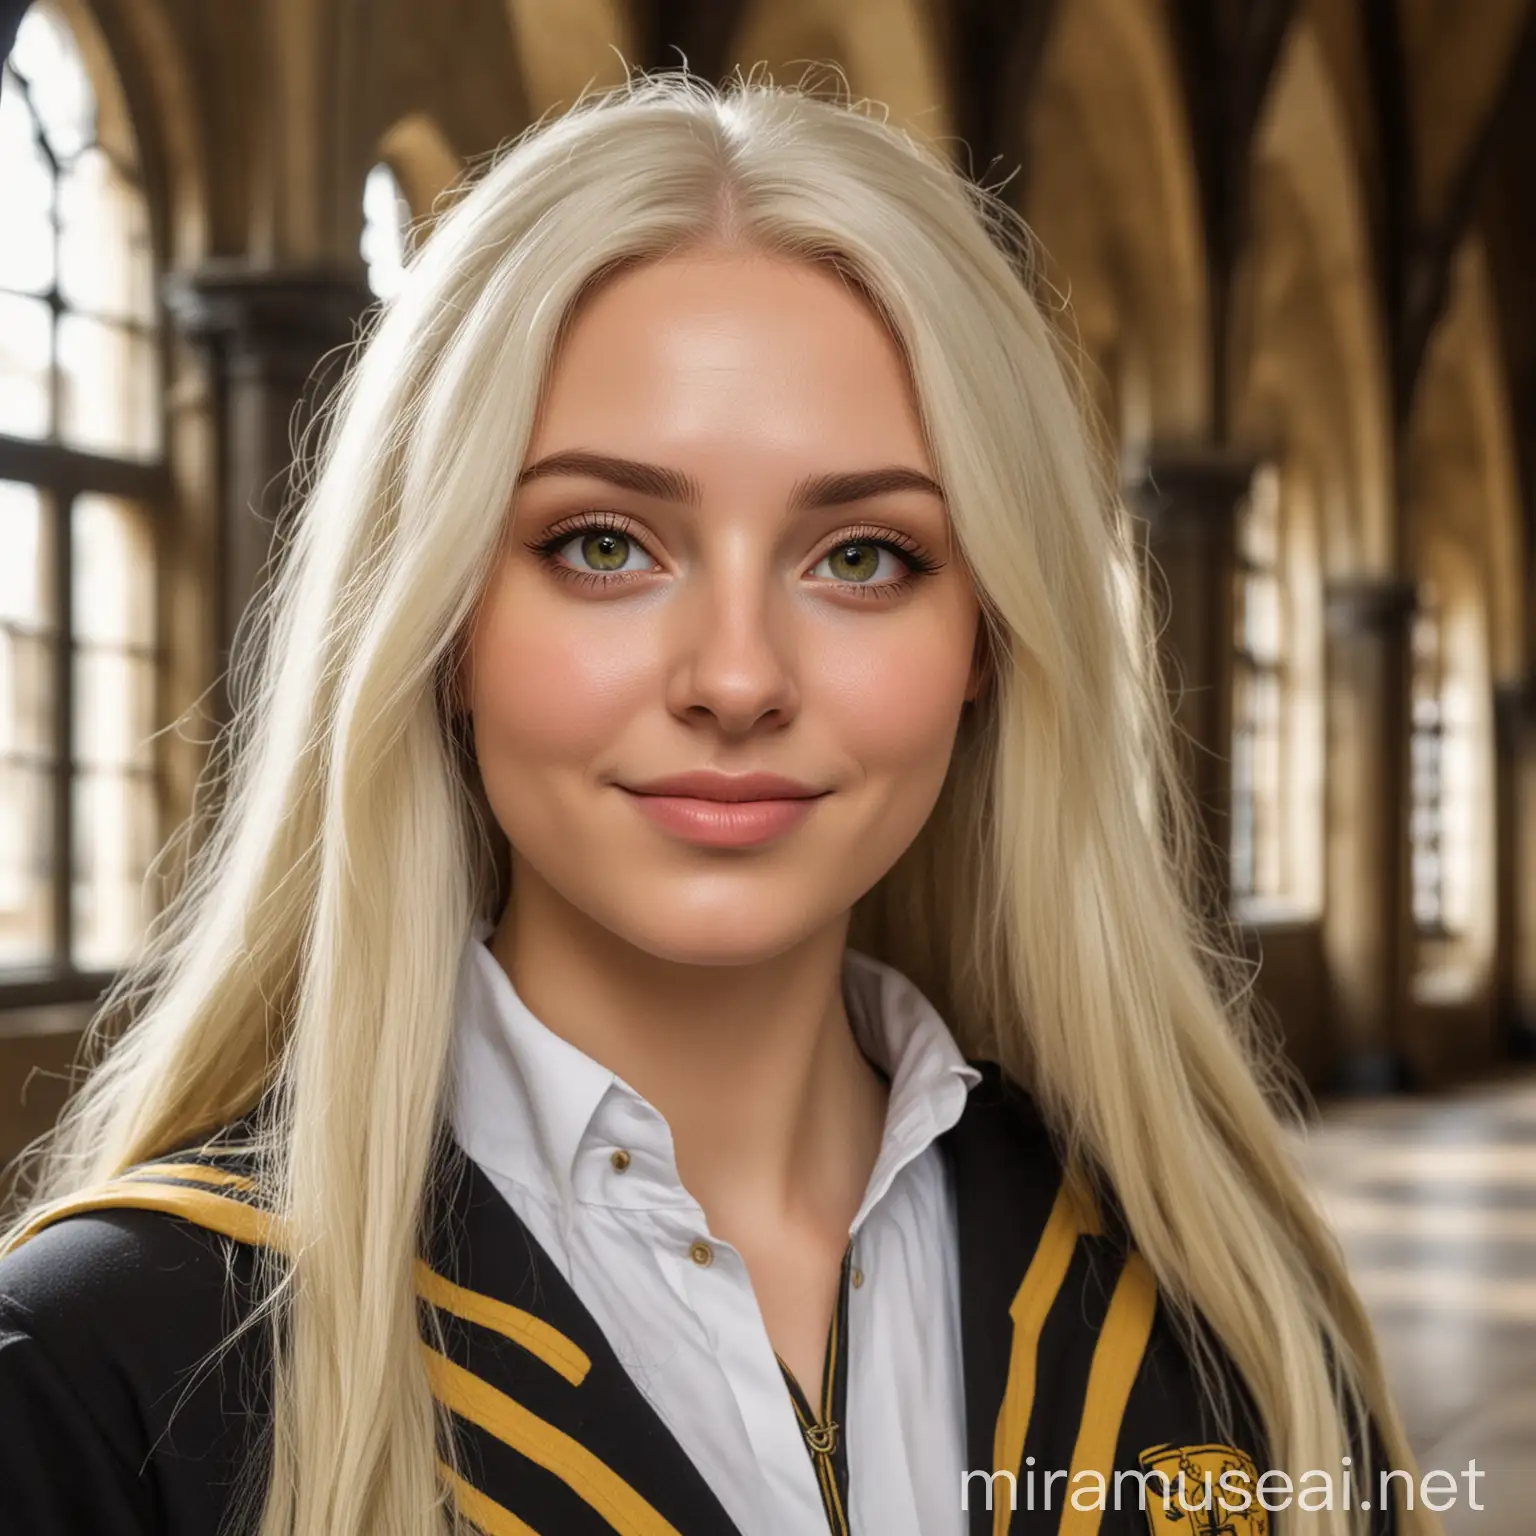 Smiling Woman in Hufflepuff Uniform in Old Great Hall